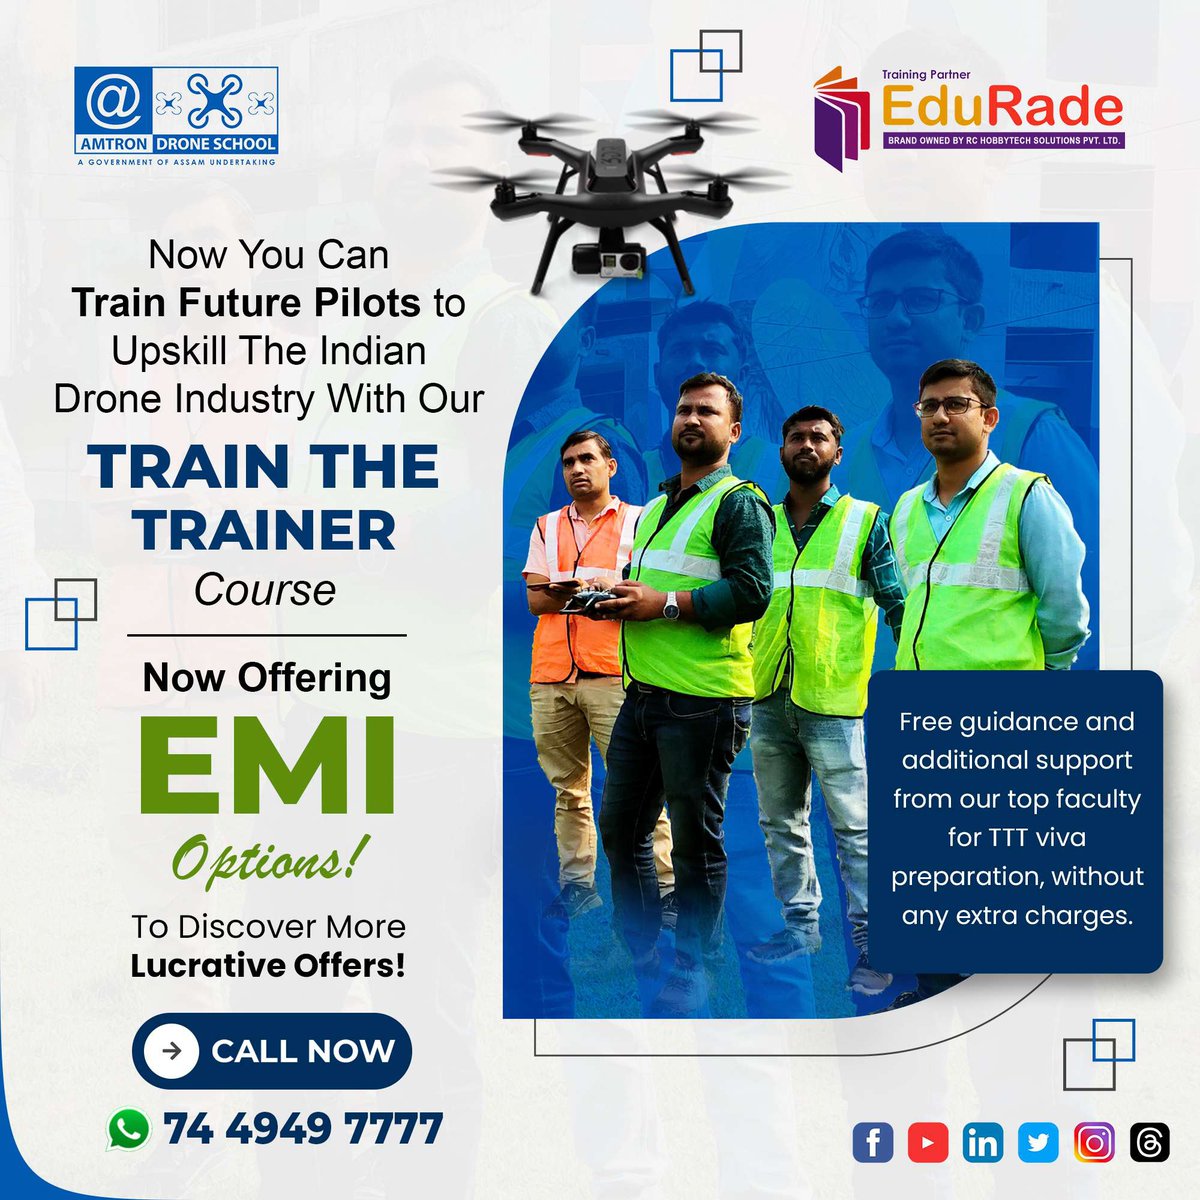 Ready to take your career to new heights?

EMI options are now available for all courses to make them convenient. 

Enroll now and be part of the Indian drone industry's growth!

📲 74494 97777
#EduRade #DronePilot #PilotTraining #DroneCourse #DronepilotJob #DronePilotCertificate